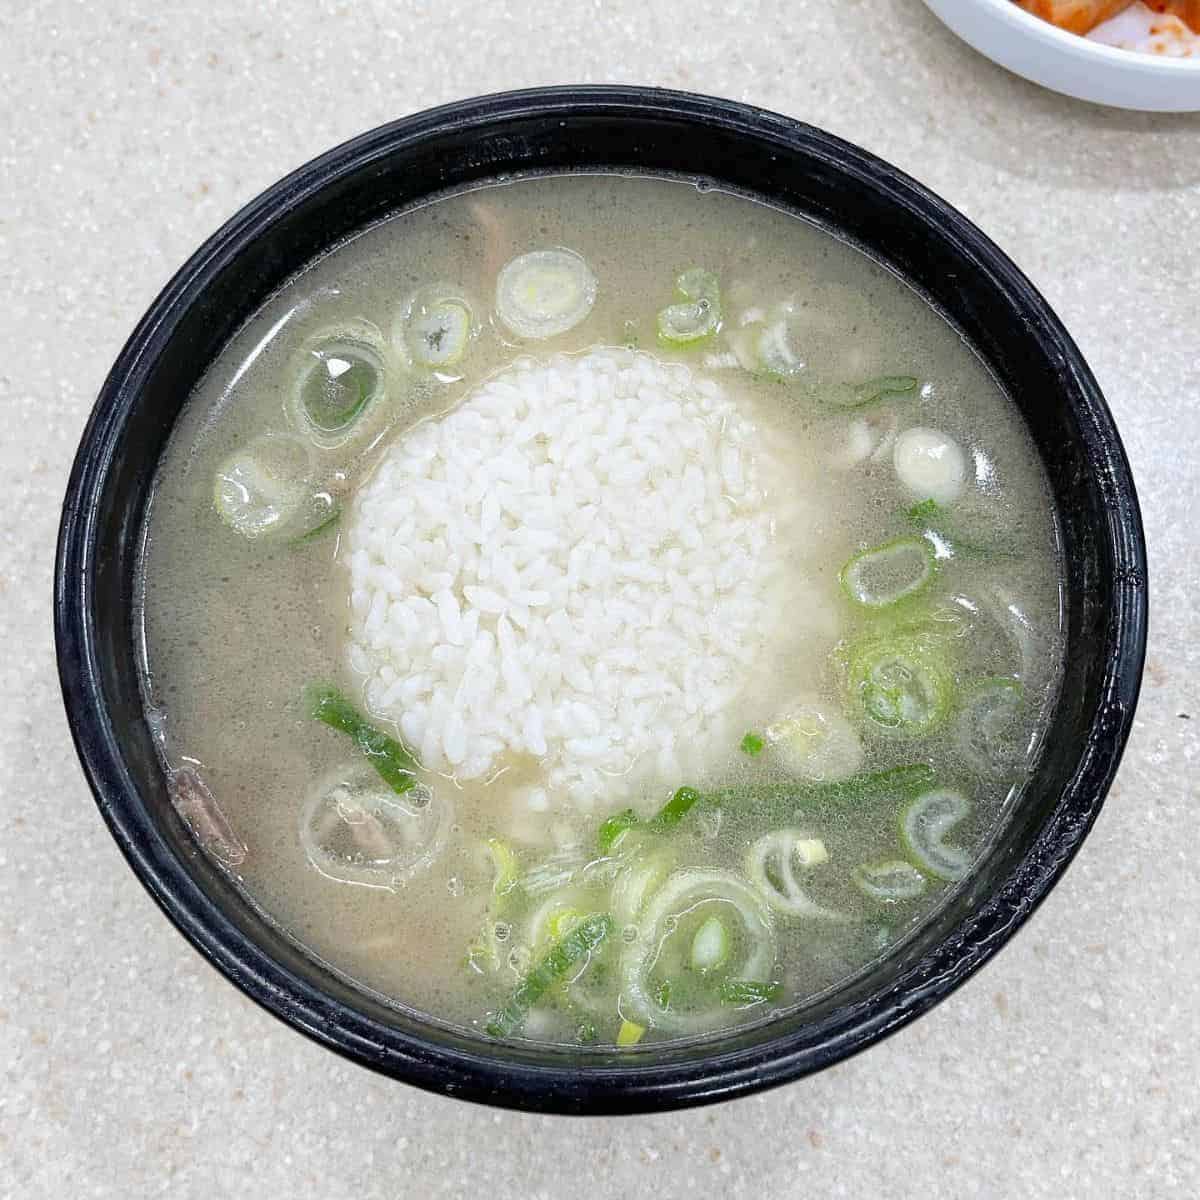 A cup of rice drowned in a hot broth with sliced scallions